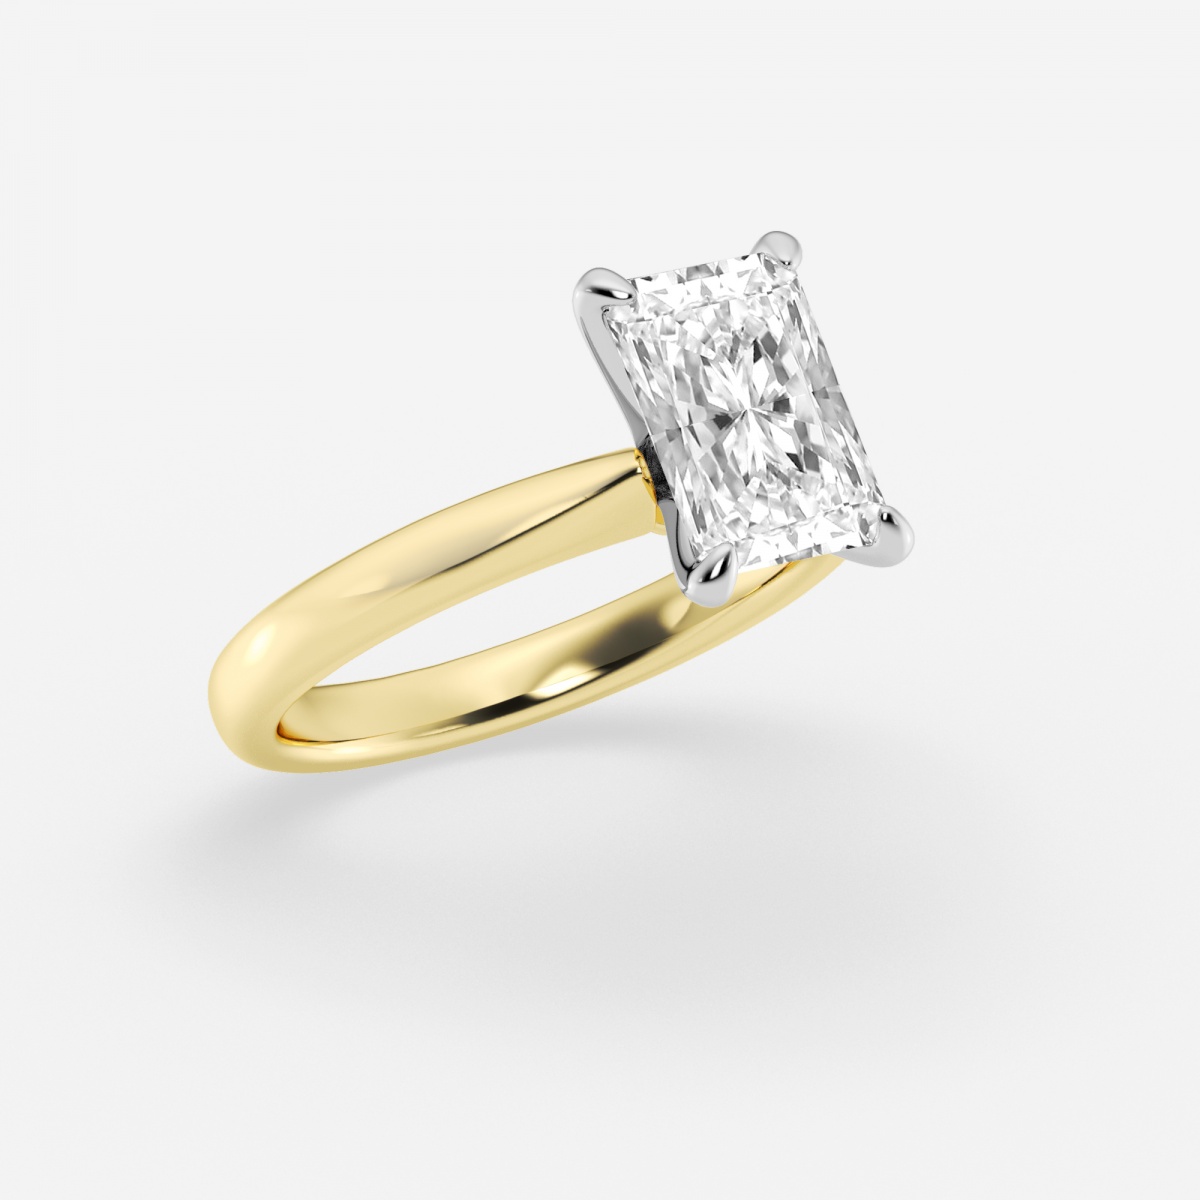 Additional Image 1 for  2 ctw Radiant Lab Grown Diamond Petite Solitaire Engagement Ring